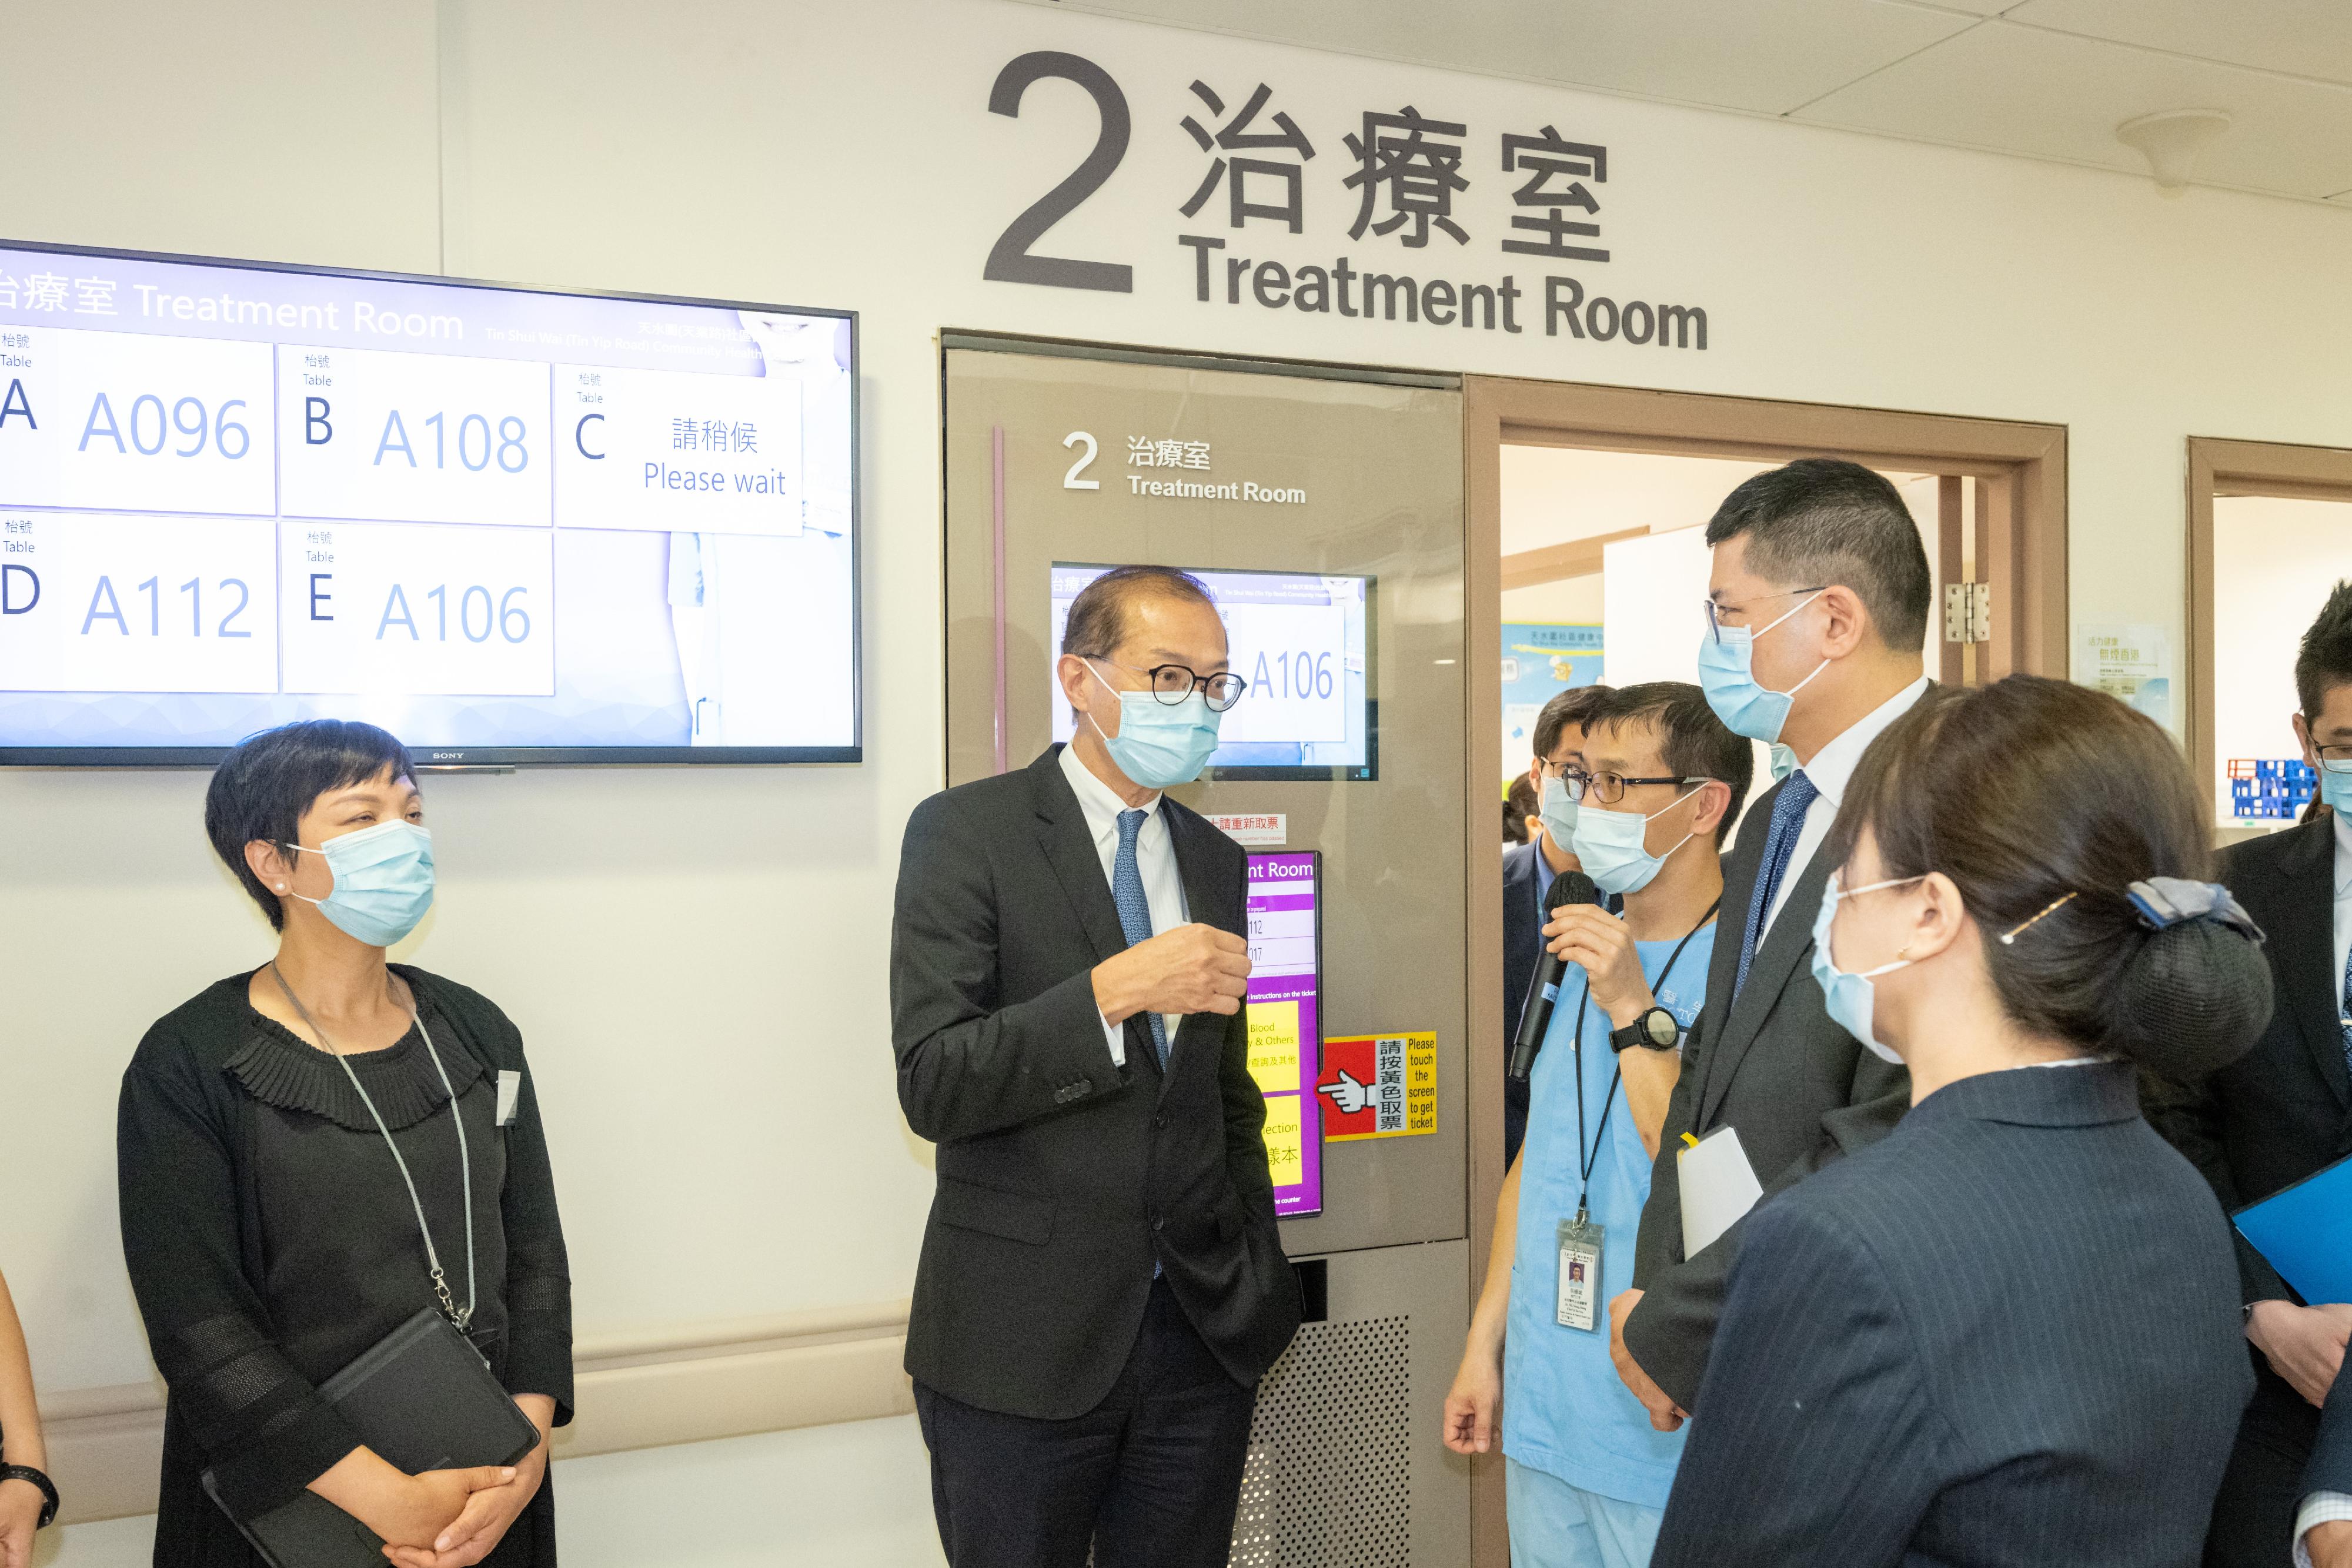 The Secretary for Health, Professor Lo Chung-mau (second left), visits the Tin Shui Wai (Tin Yip Road) Community Health Centre today (July 20) and learns from the staff about the daily operation of the general out-patient treatment room in the Centre. Looking on is the Chief Executive of the Hospital Authority, Dr Tony Ko (second right).